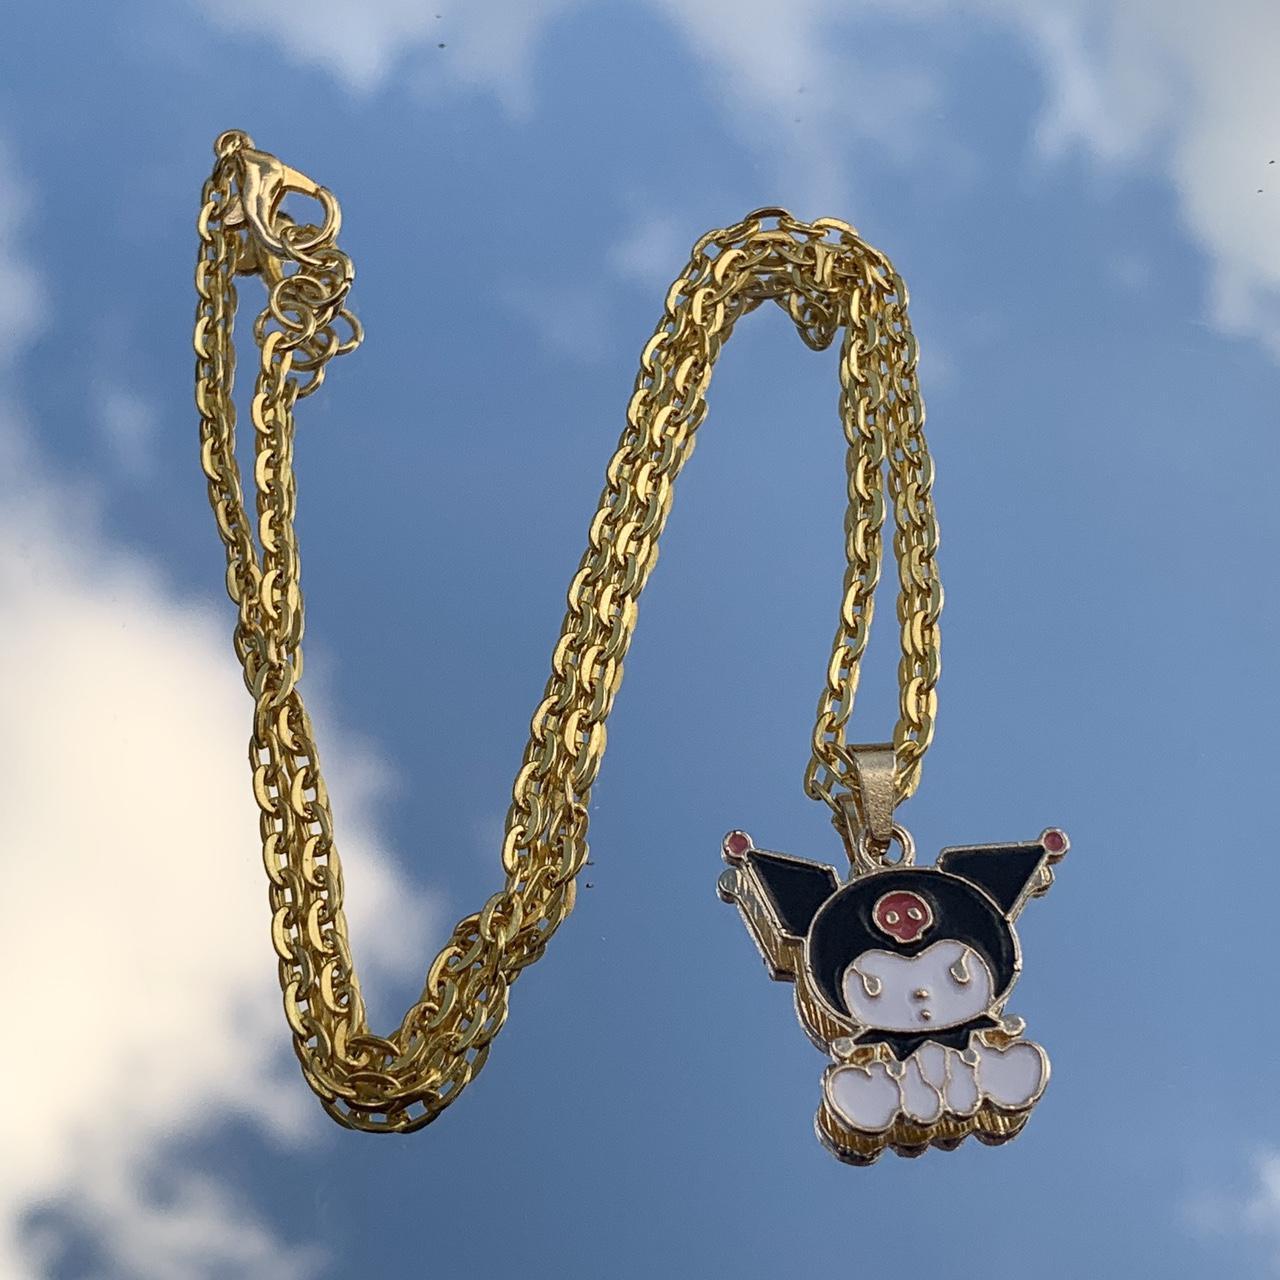 Product Image 2 - kuromi necklace

• the necklace is